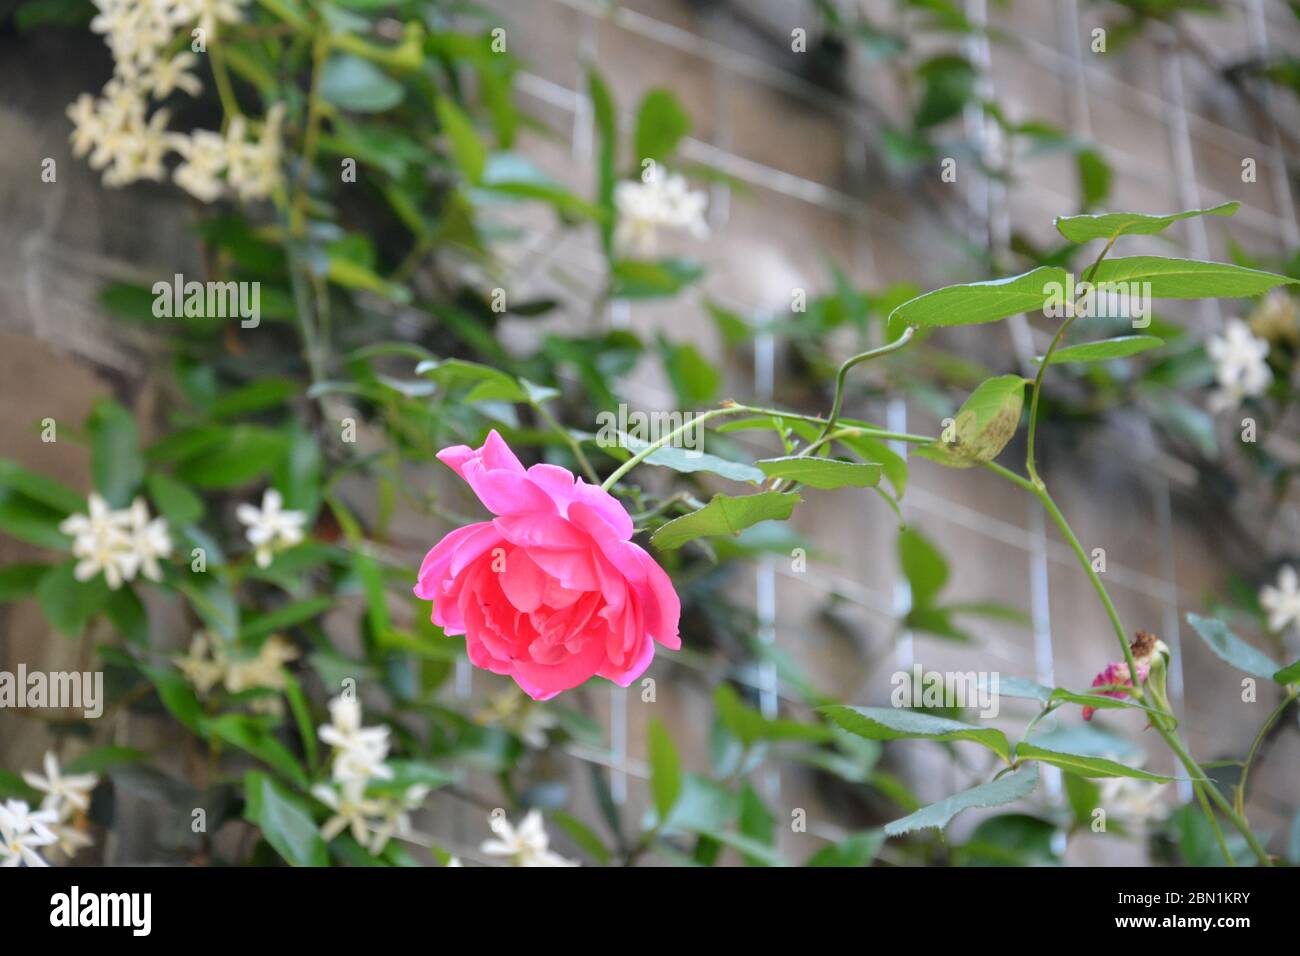 one single pink rose blossoms in May Stock Photo